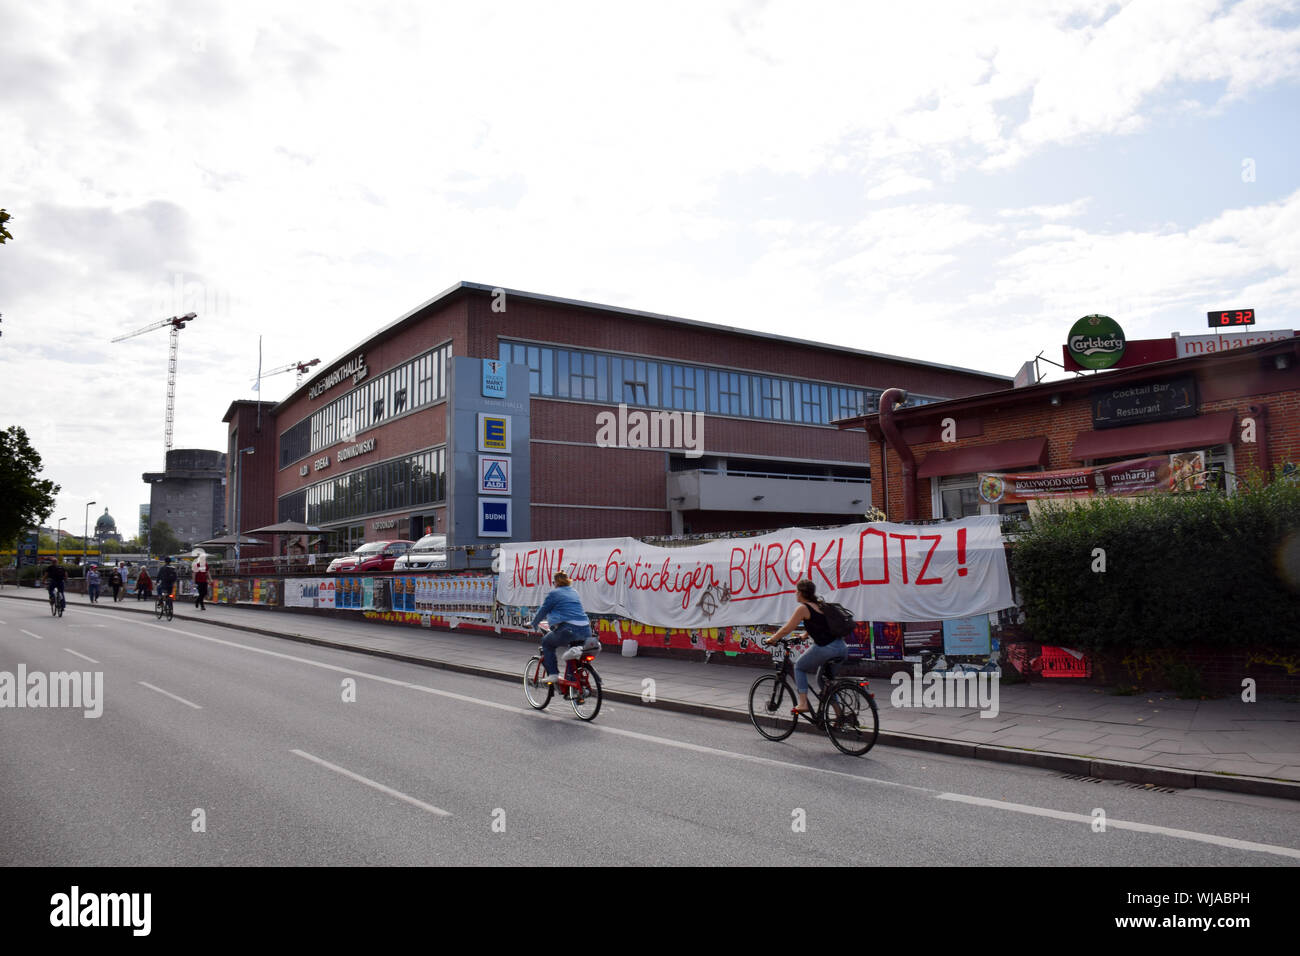 Protest at Rindermarkthalle that a car park was created instead of an urban garden, Hamburg, Germany Aug 2019 Stock Photo